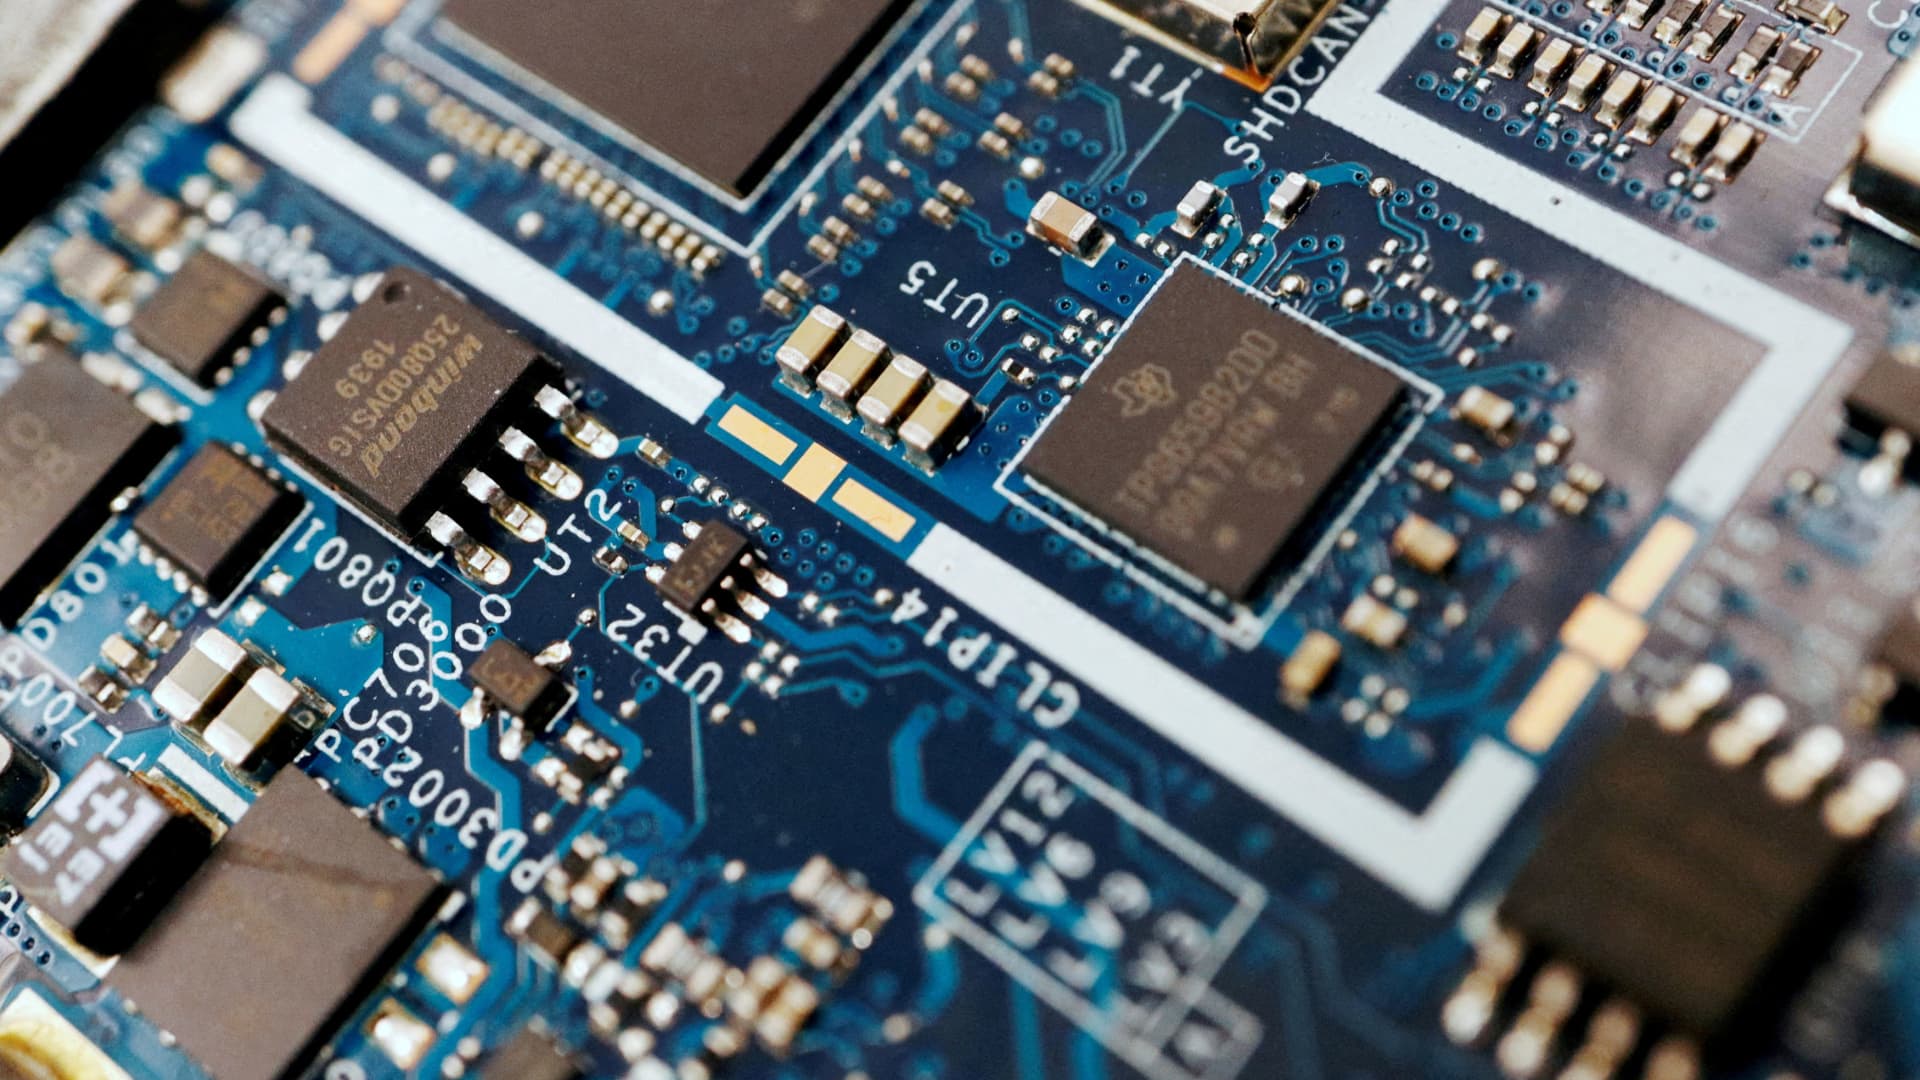 Samsung and ASML to invest 0 million to build an advanced chip plant in South Korea